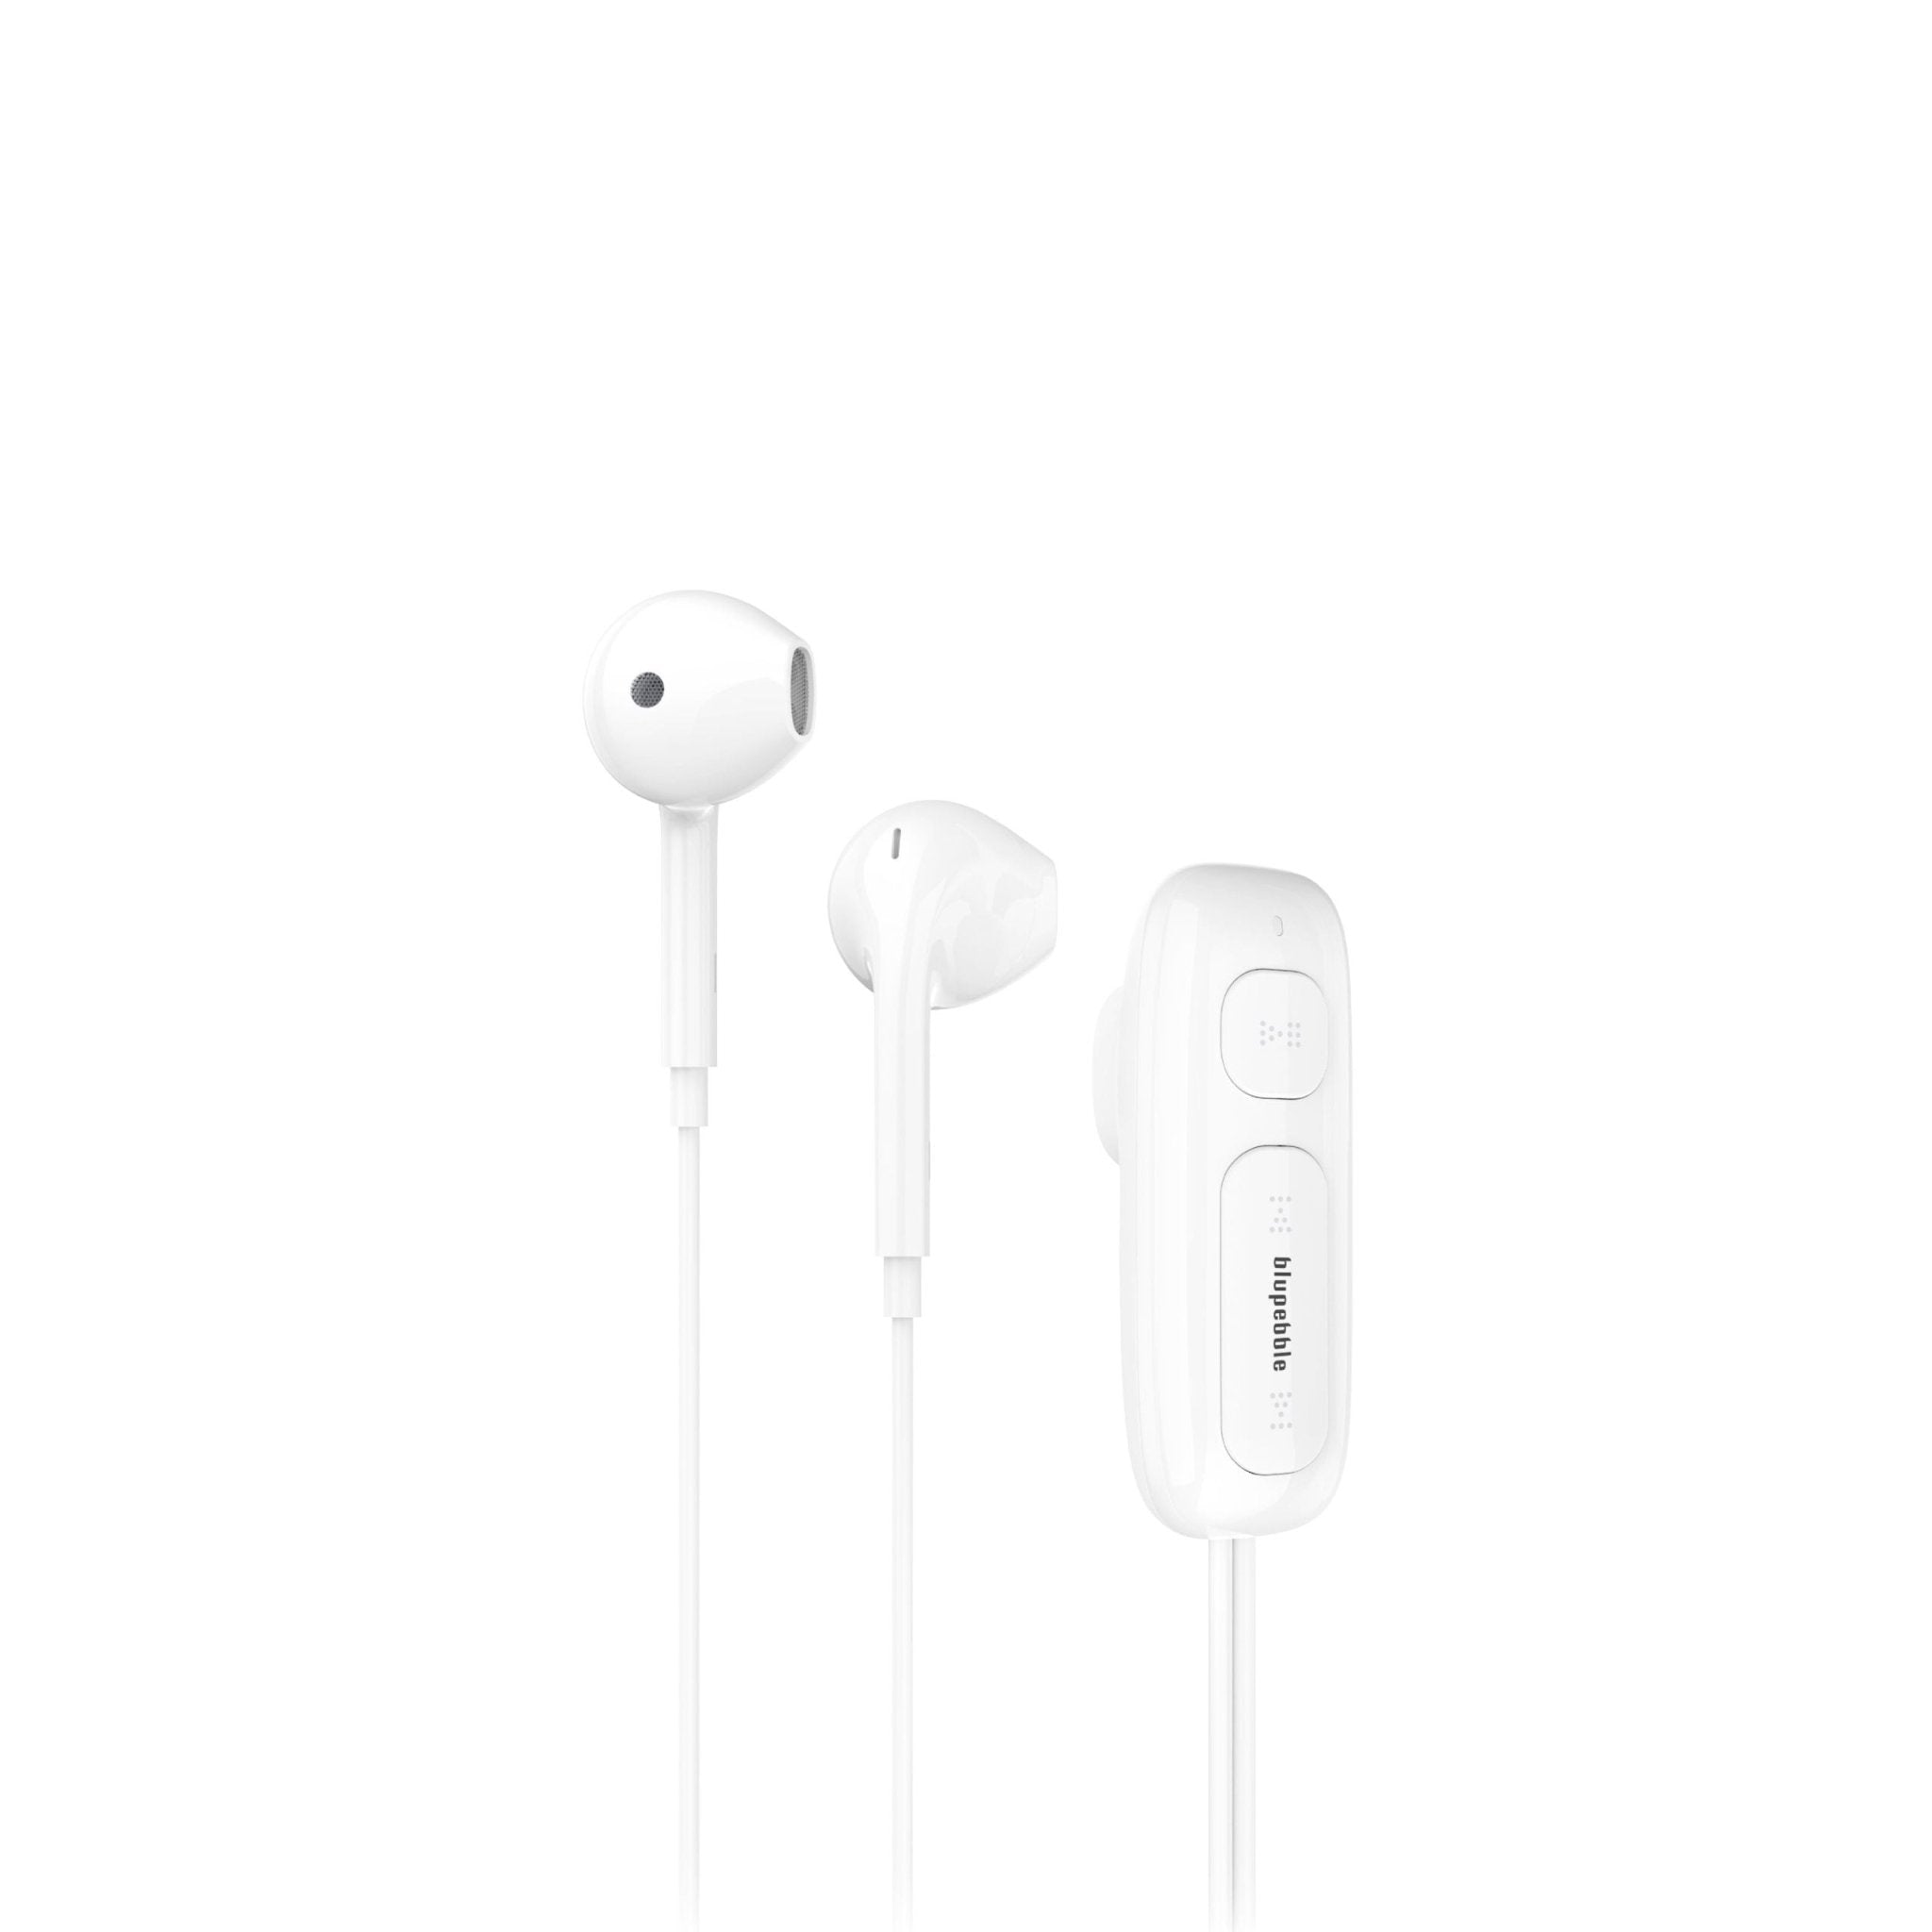 Blupebble BT Clip Wireless Earphone With Ultra-Long Battery LIFE - White